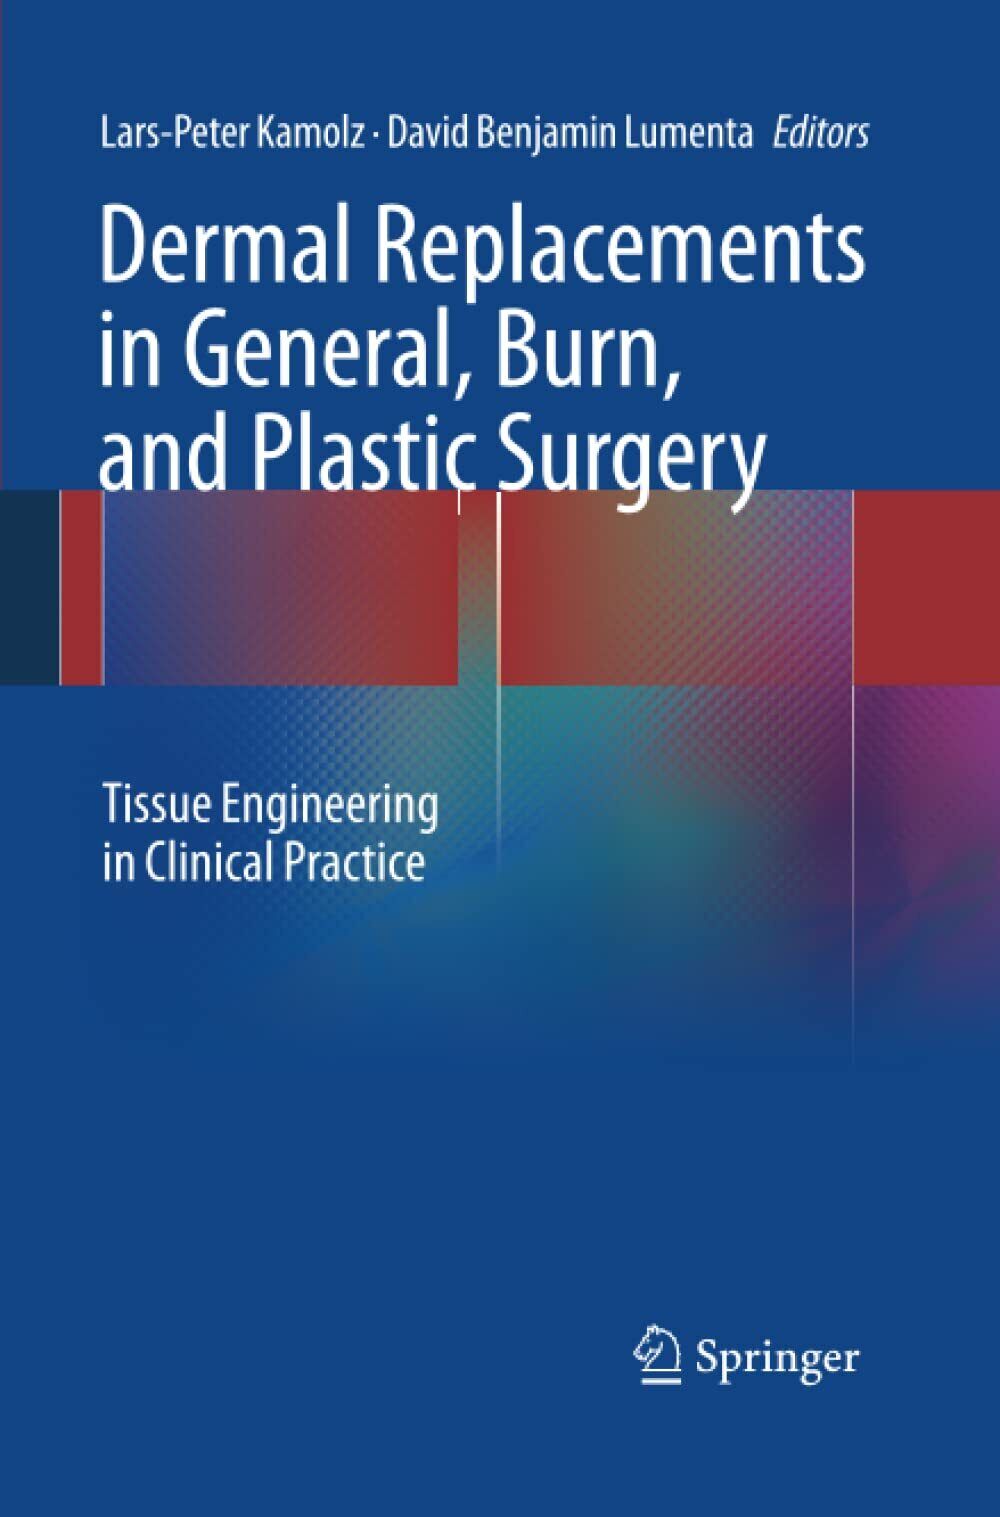 Dermal Replacements in General, Burn, and Plastic Surgery - Springer, 2015